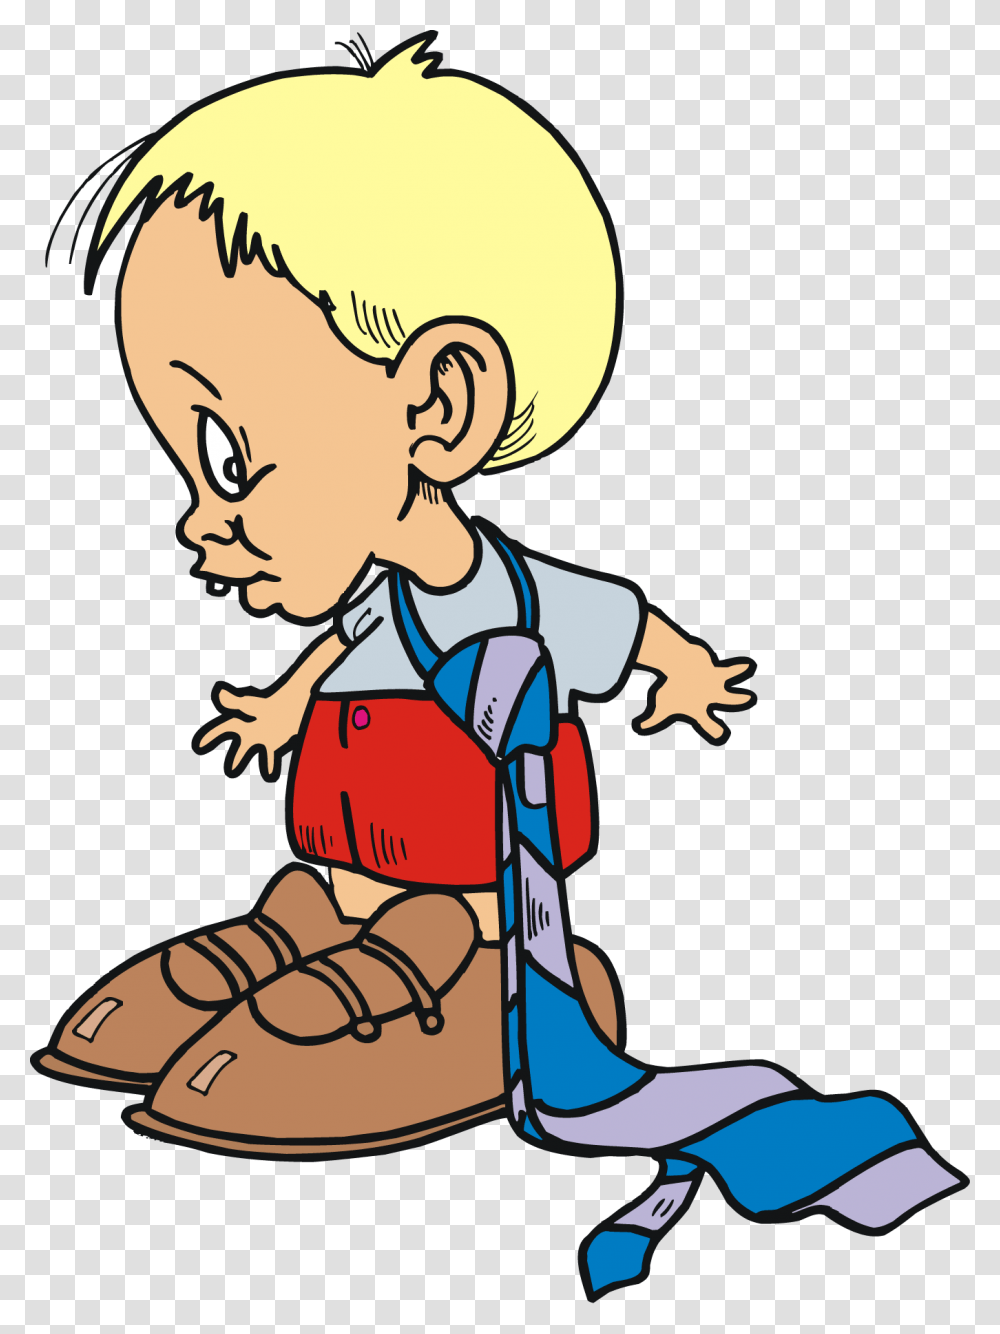 Free Small Child Wearing His Dads Cloths Vector Clip Clipart Getting Dressed, Person, Human, Kneeling, Outdoors Transparent Png